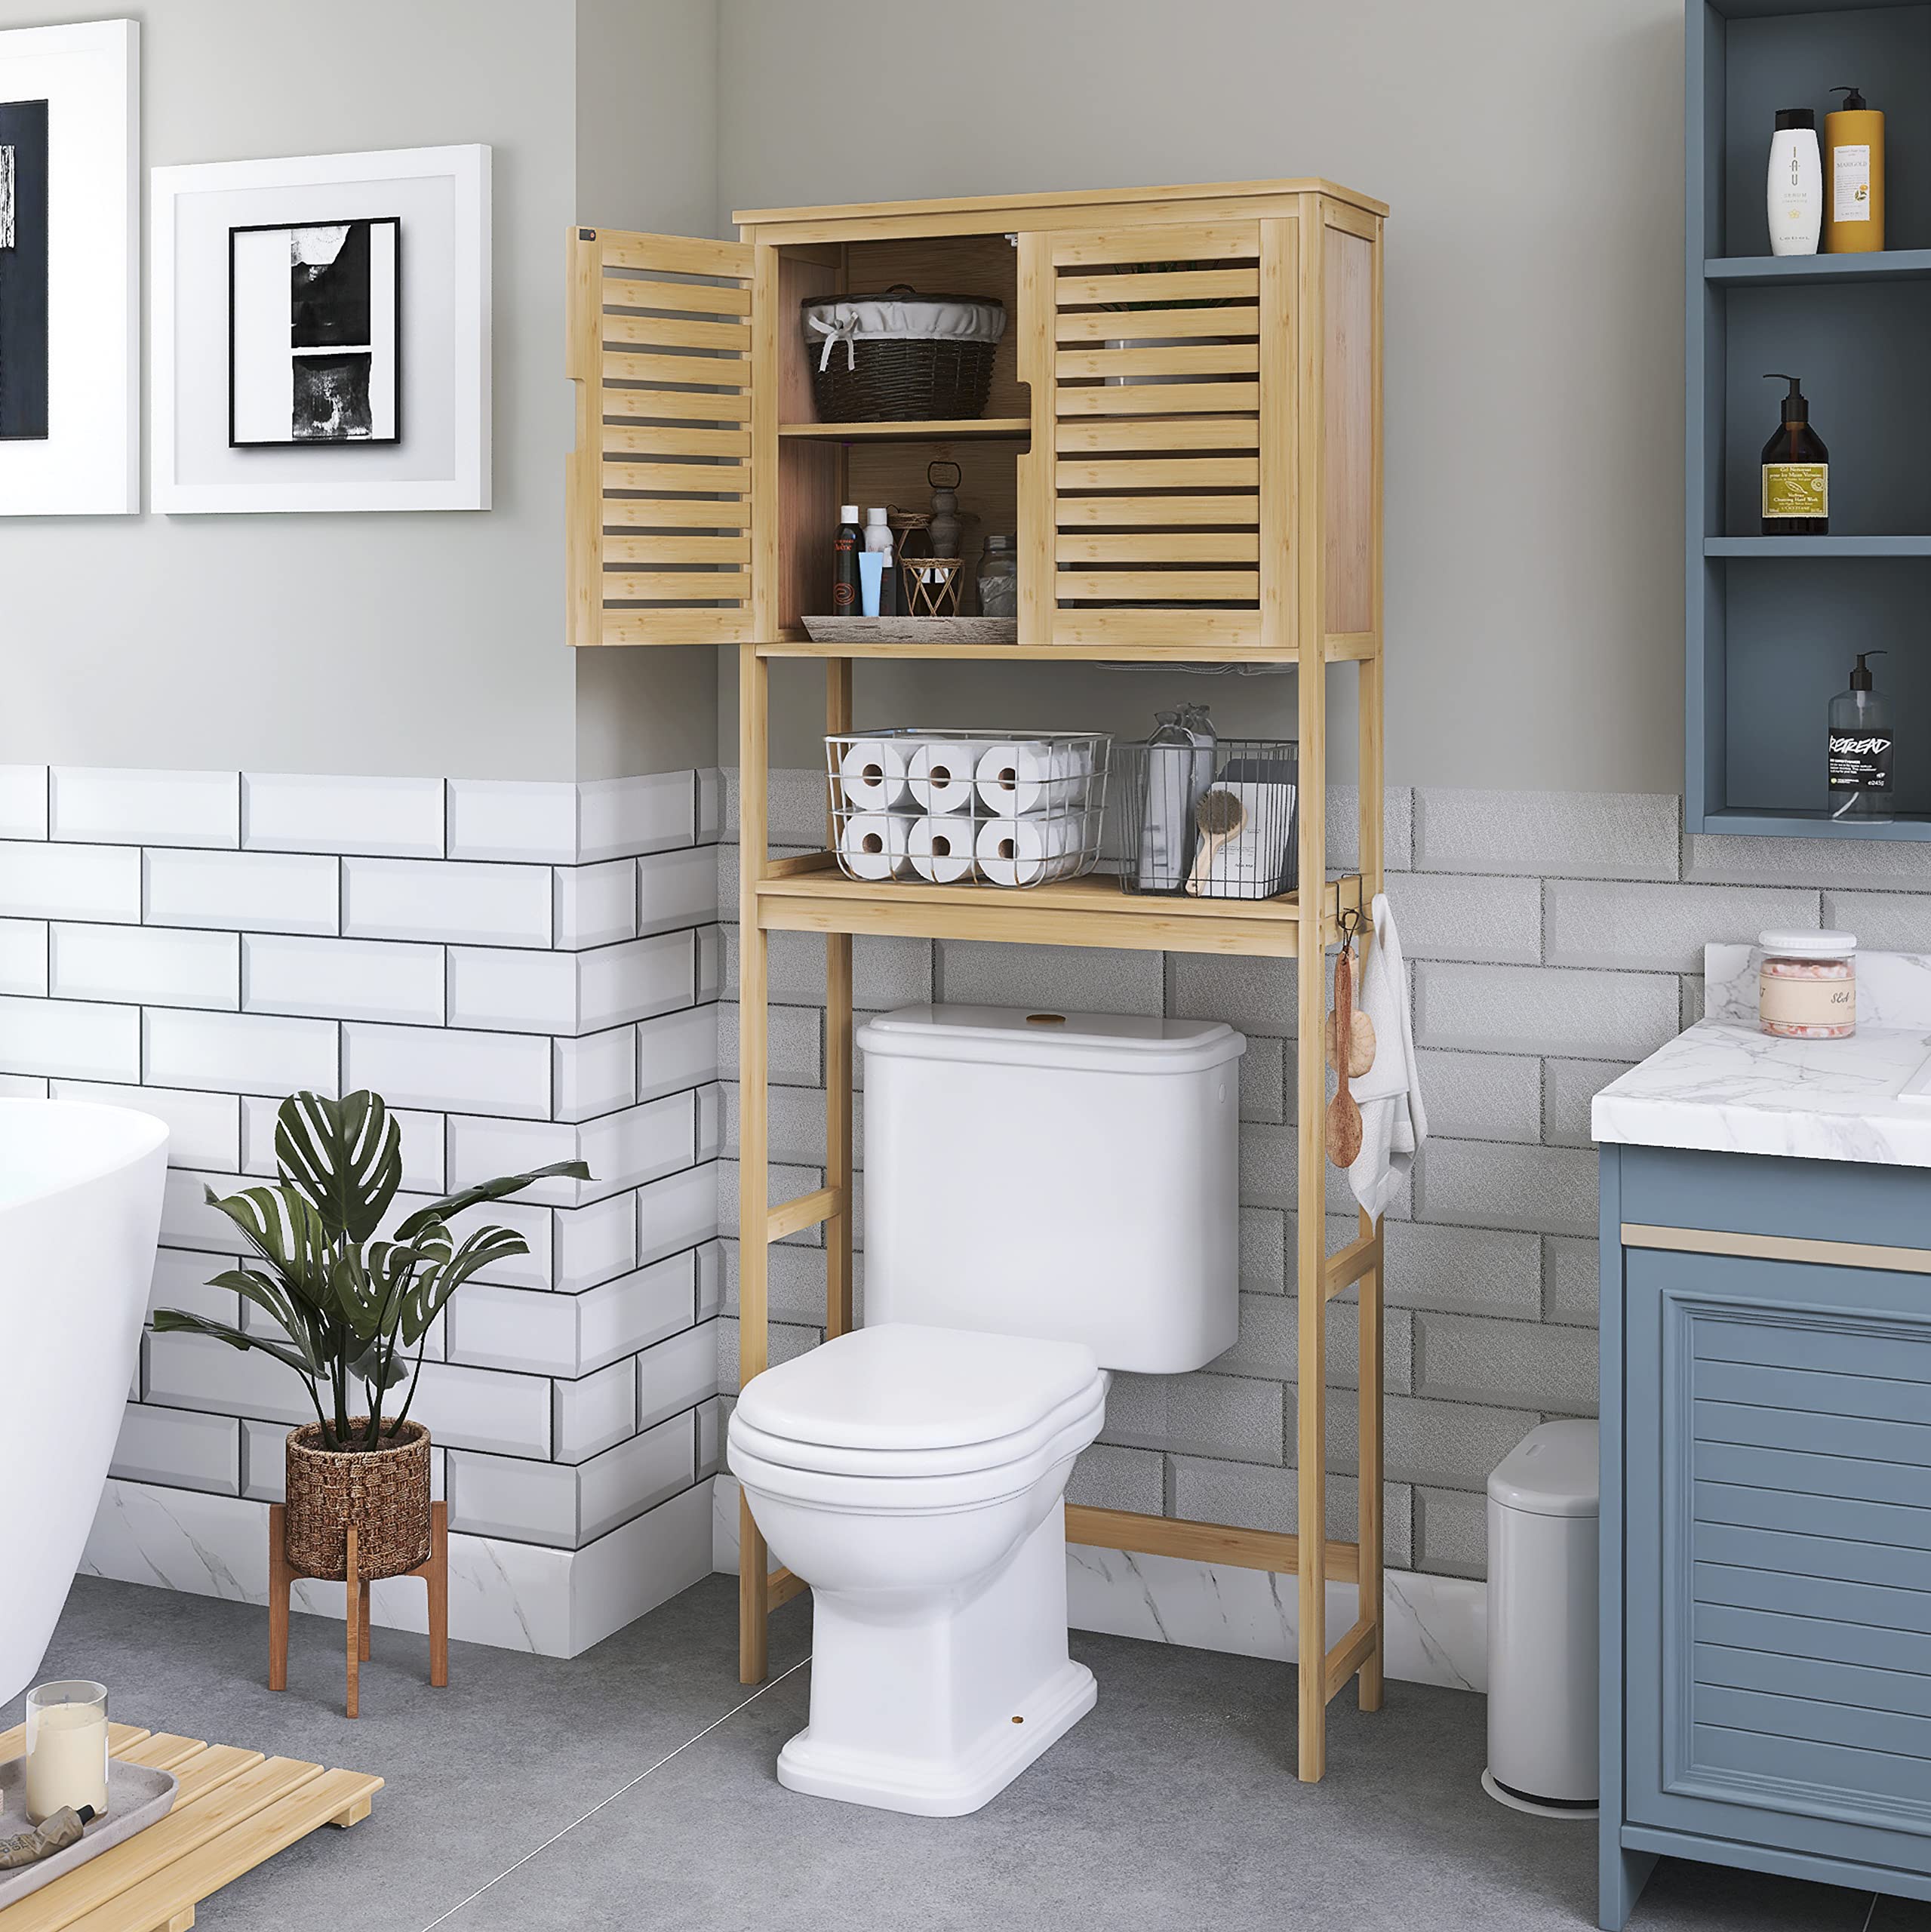 SMIBUY Bathroom Over The Toilet Storage Cabinet and Bathroom Cabinet Wall Mounted, Door Bamboo Cabinet Organizer and Space Saver Medicine Cabinet with 2 Door and Adjustable Shelves (Natural)